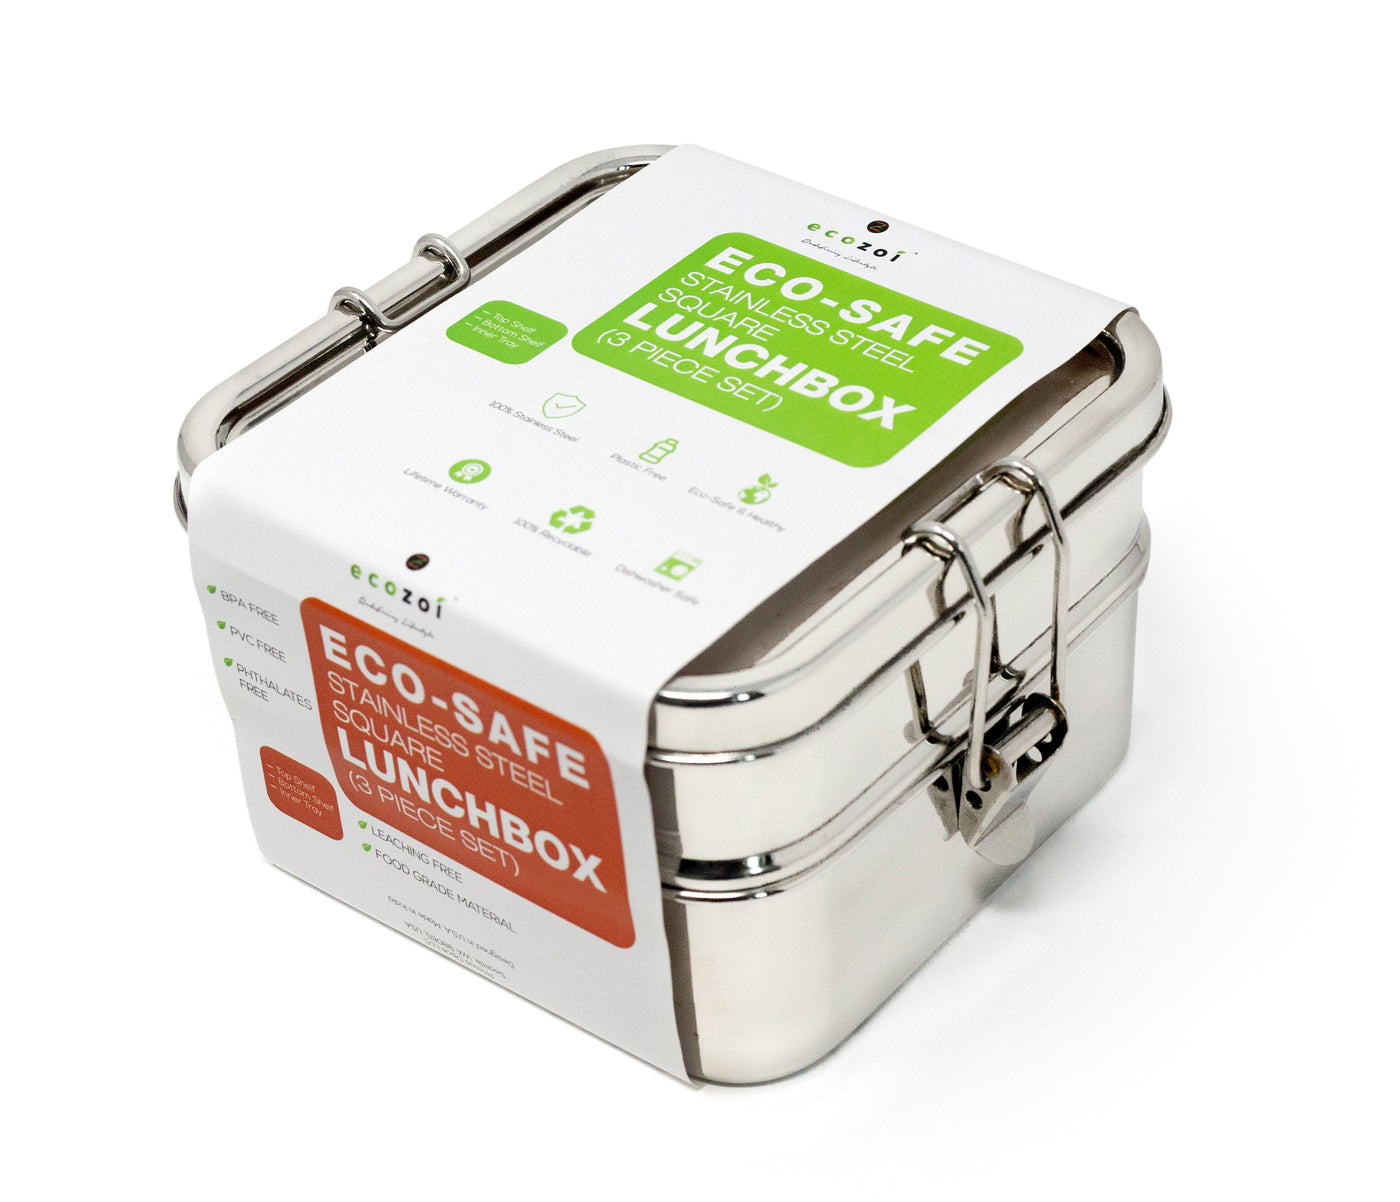 Stainless Steel Leak Proof Lunch Box, 1200 mL